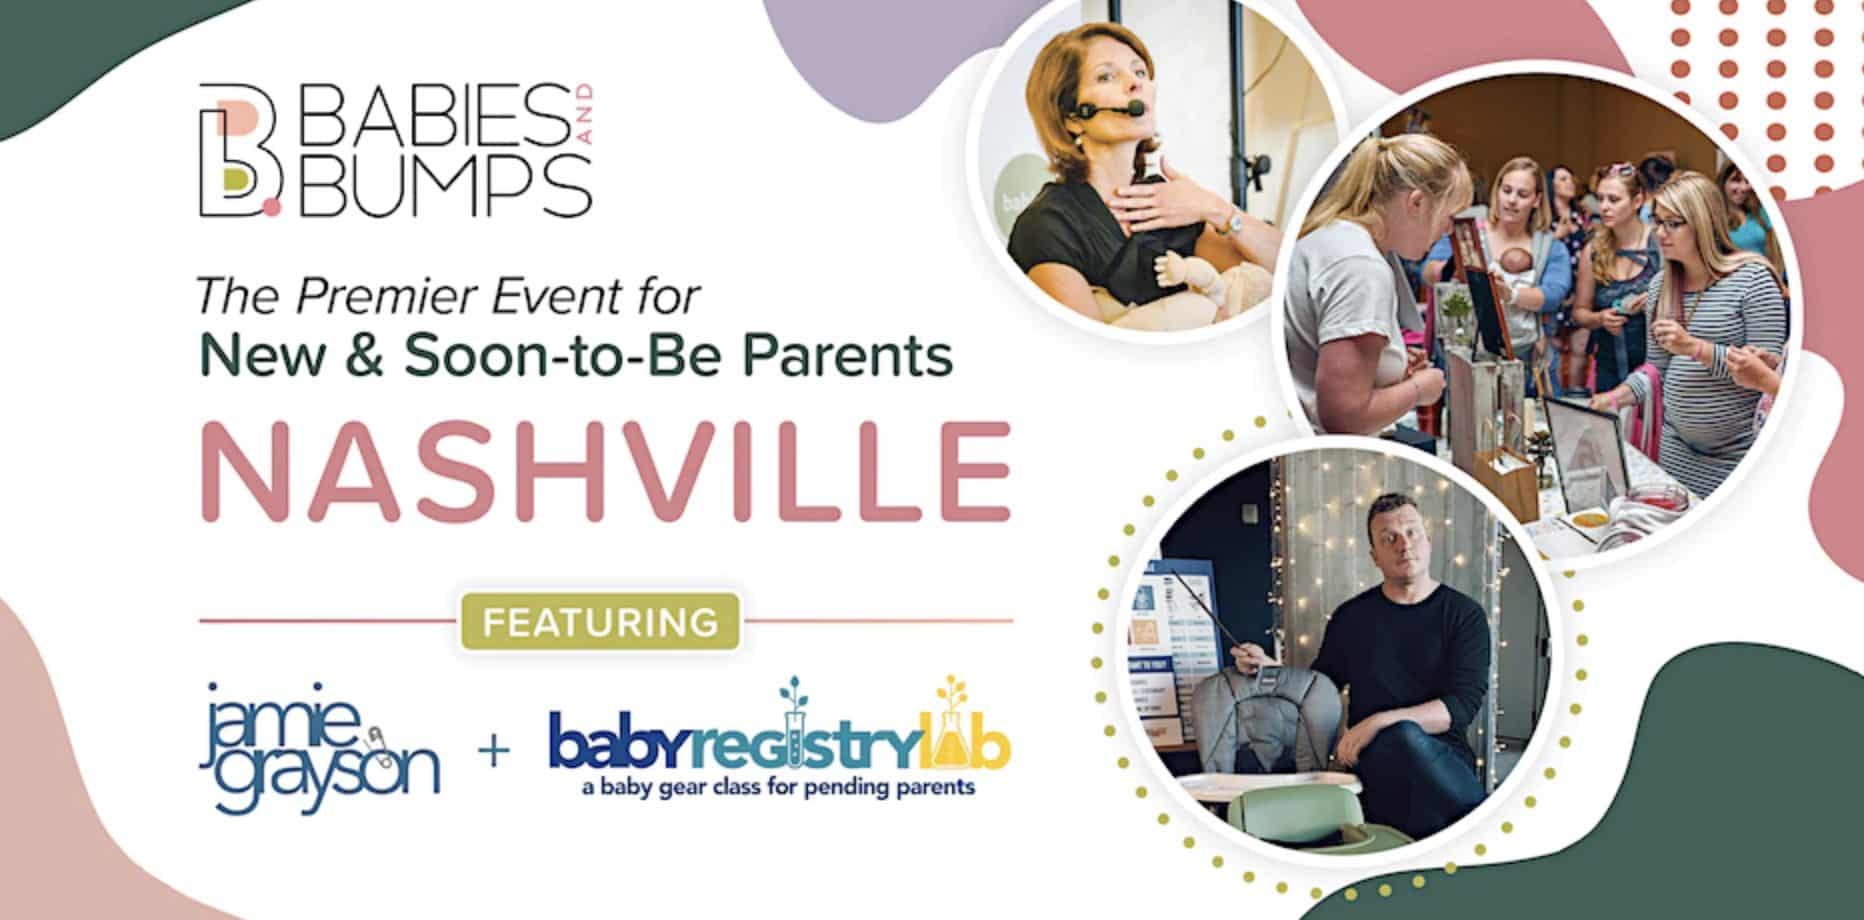 Babies & Bumps in Franklin, TN at the Franklin Marriott Cool Springs, prepare for all things pregnancy, birth, and life with a baby the 1st annual event in the Nashville area!